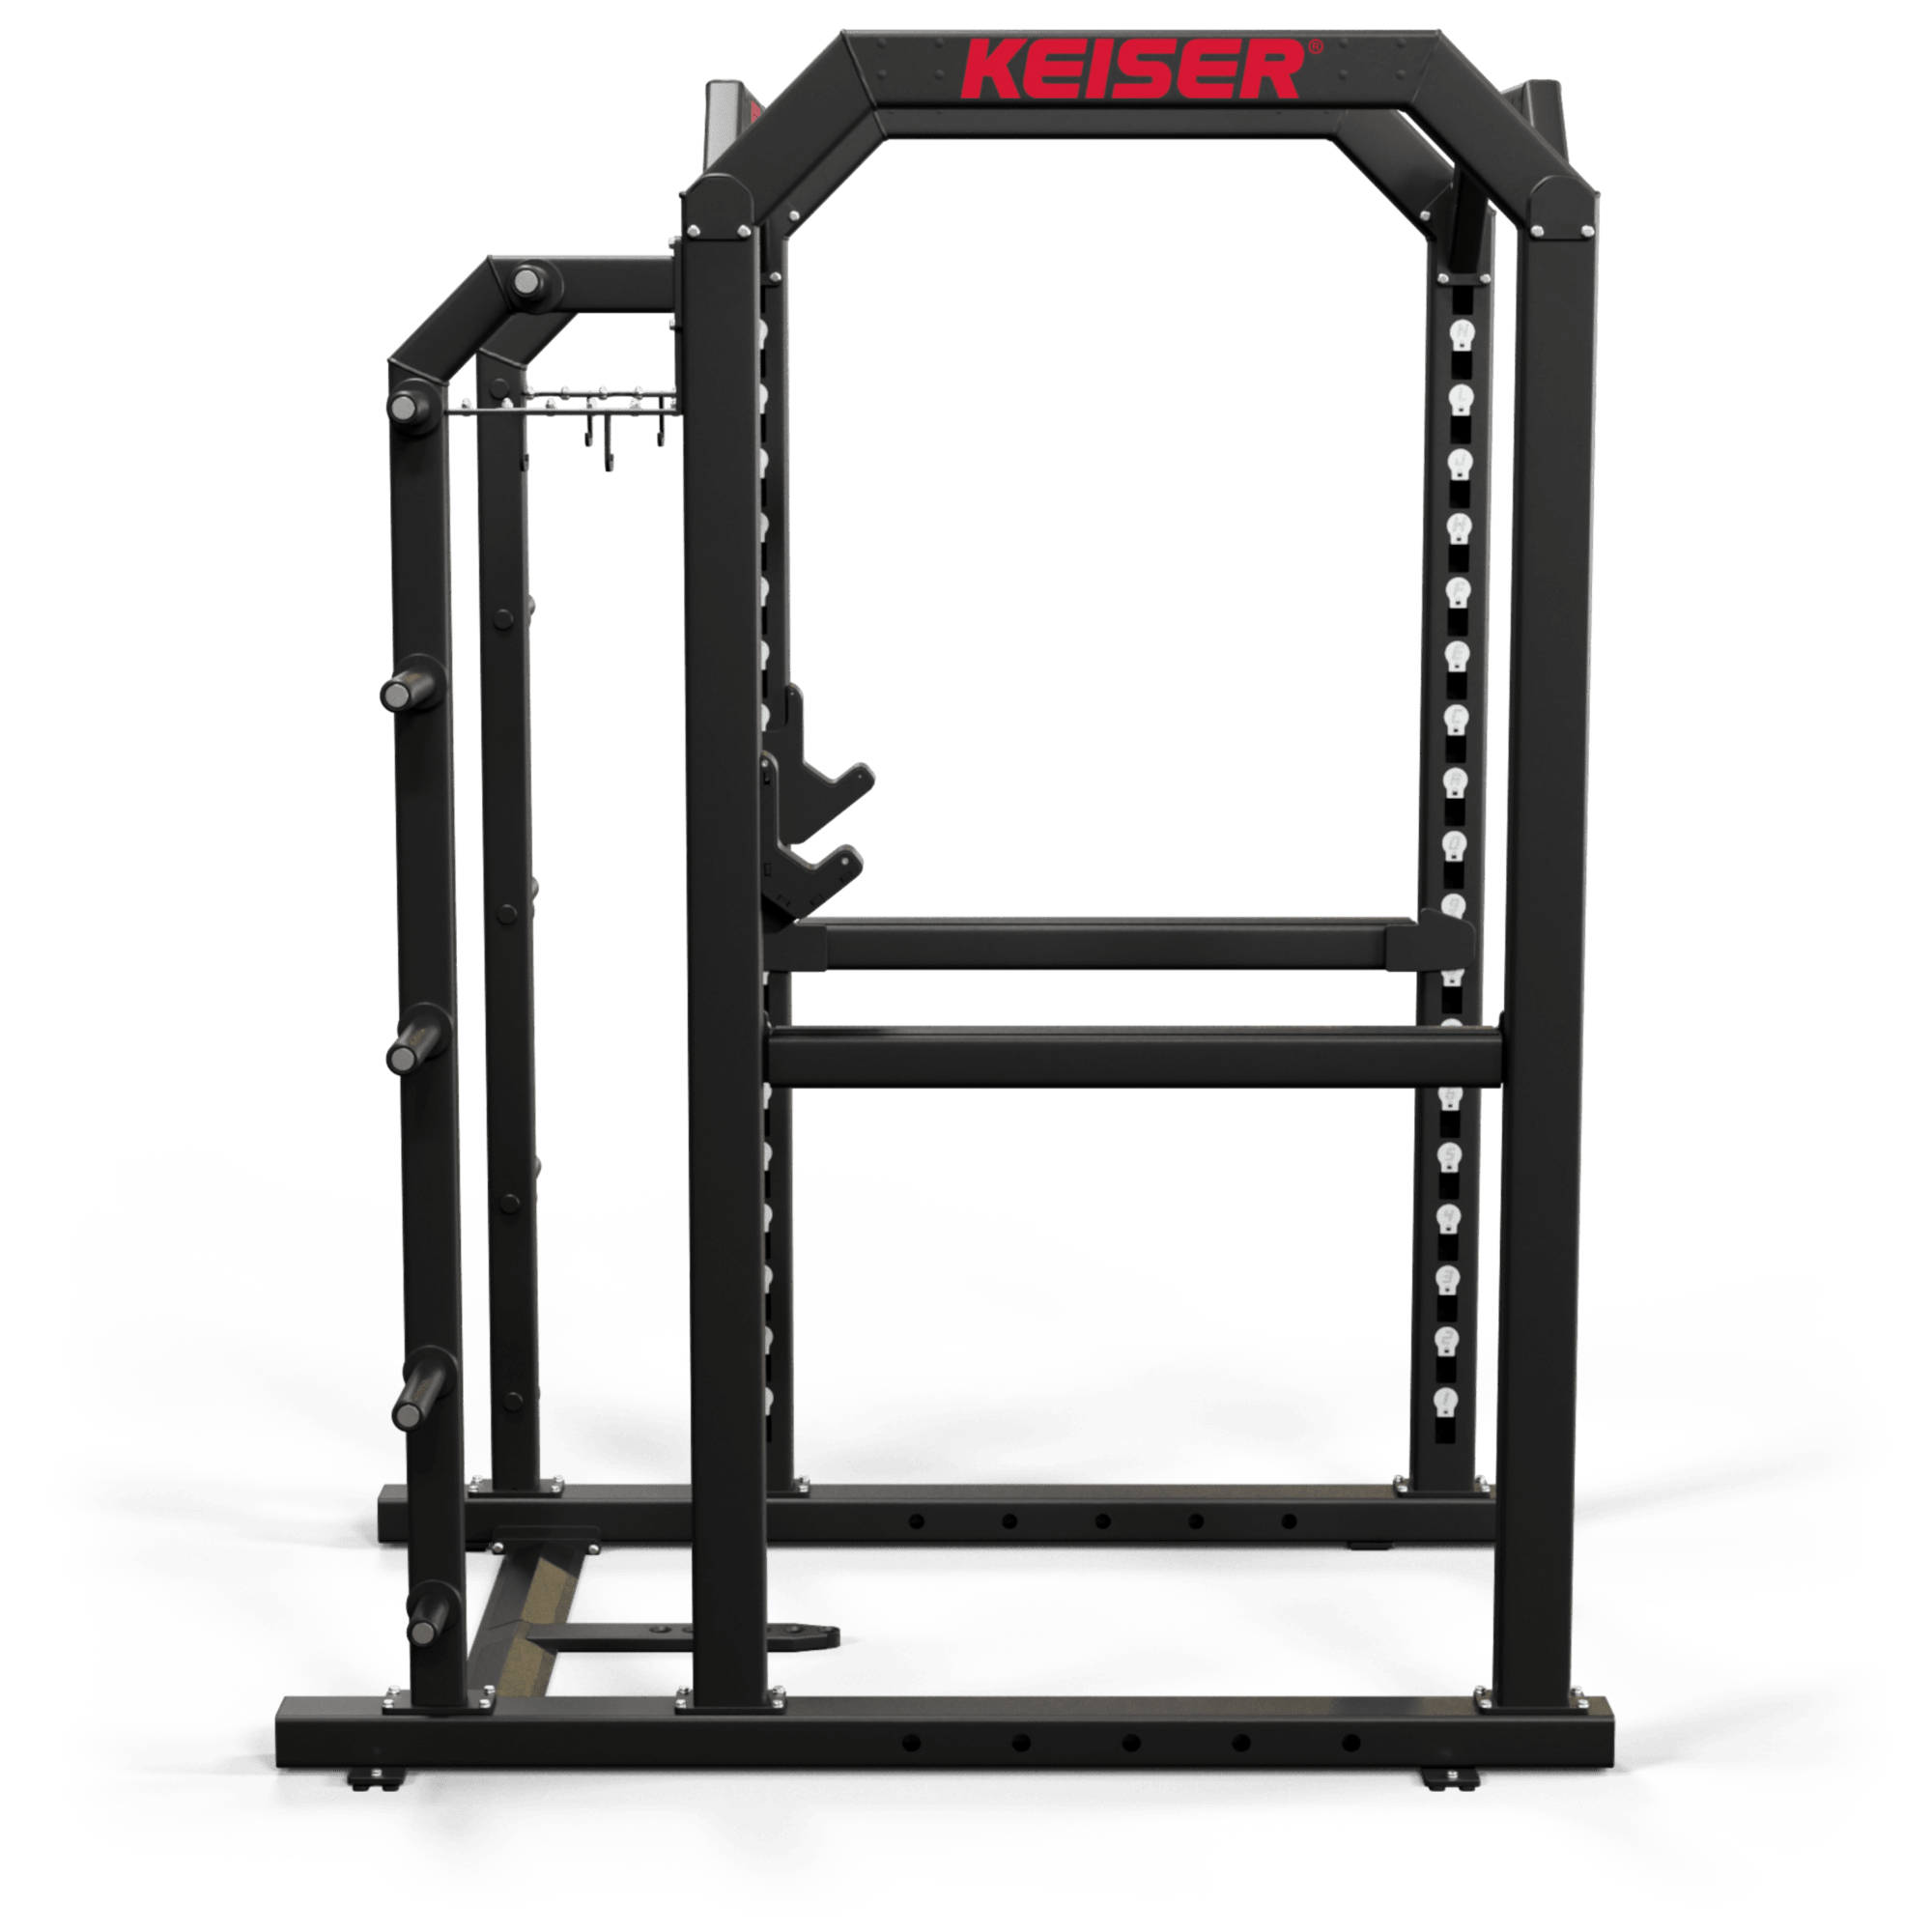 Keiser 9' Rack and a Half (Conventional)